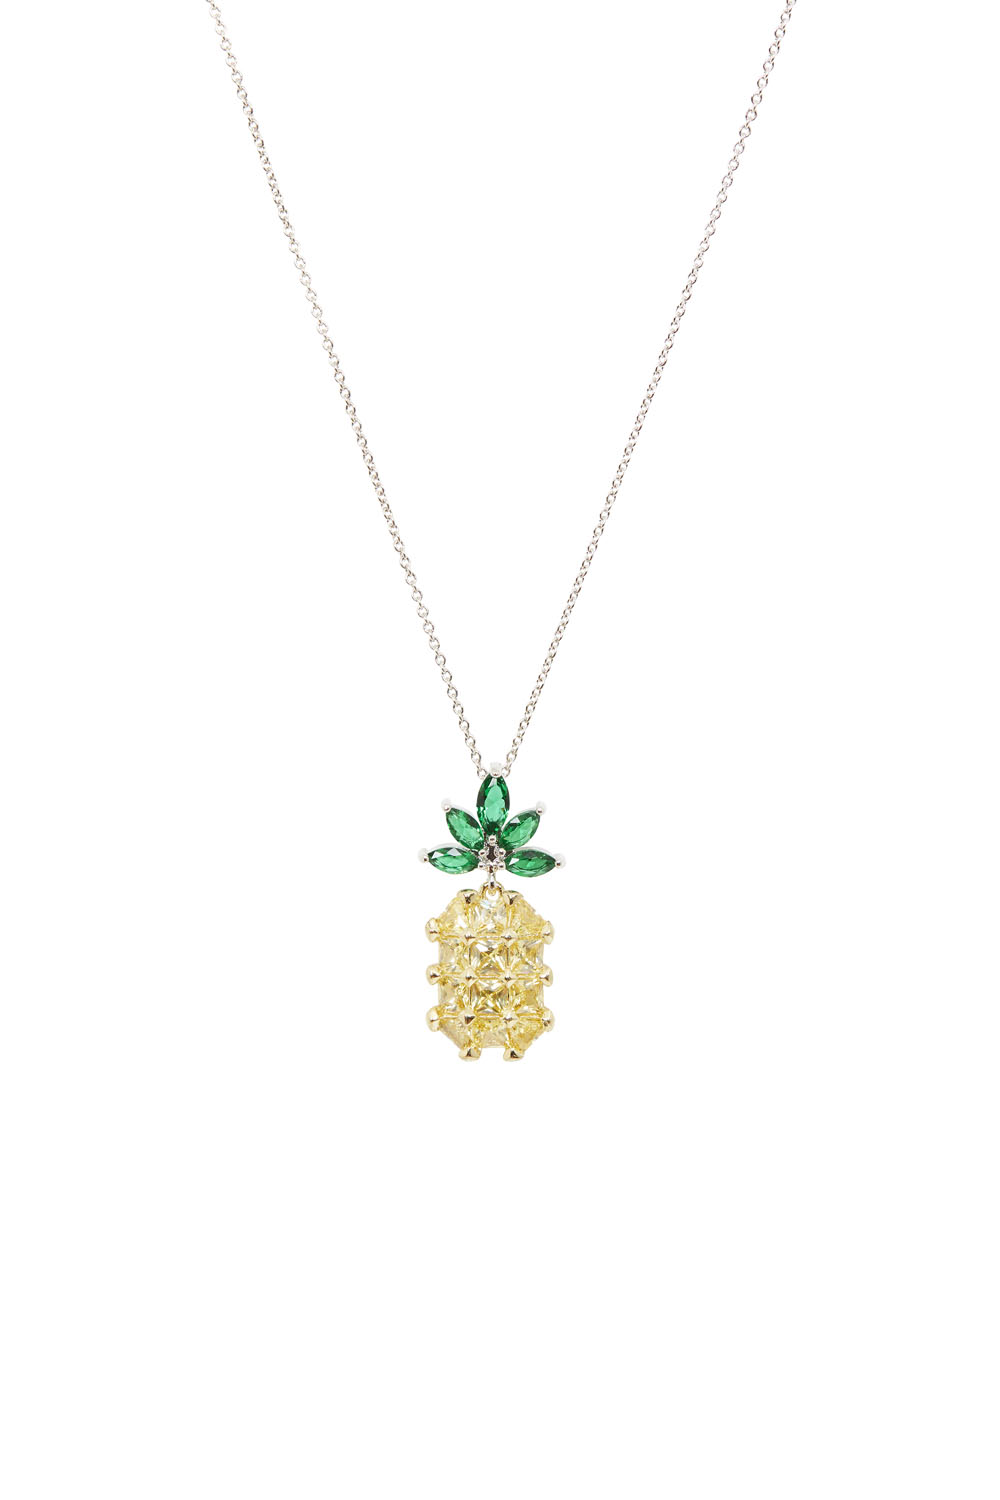 Jewelled Pineapple Necklace